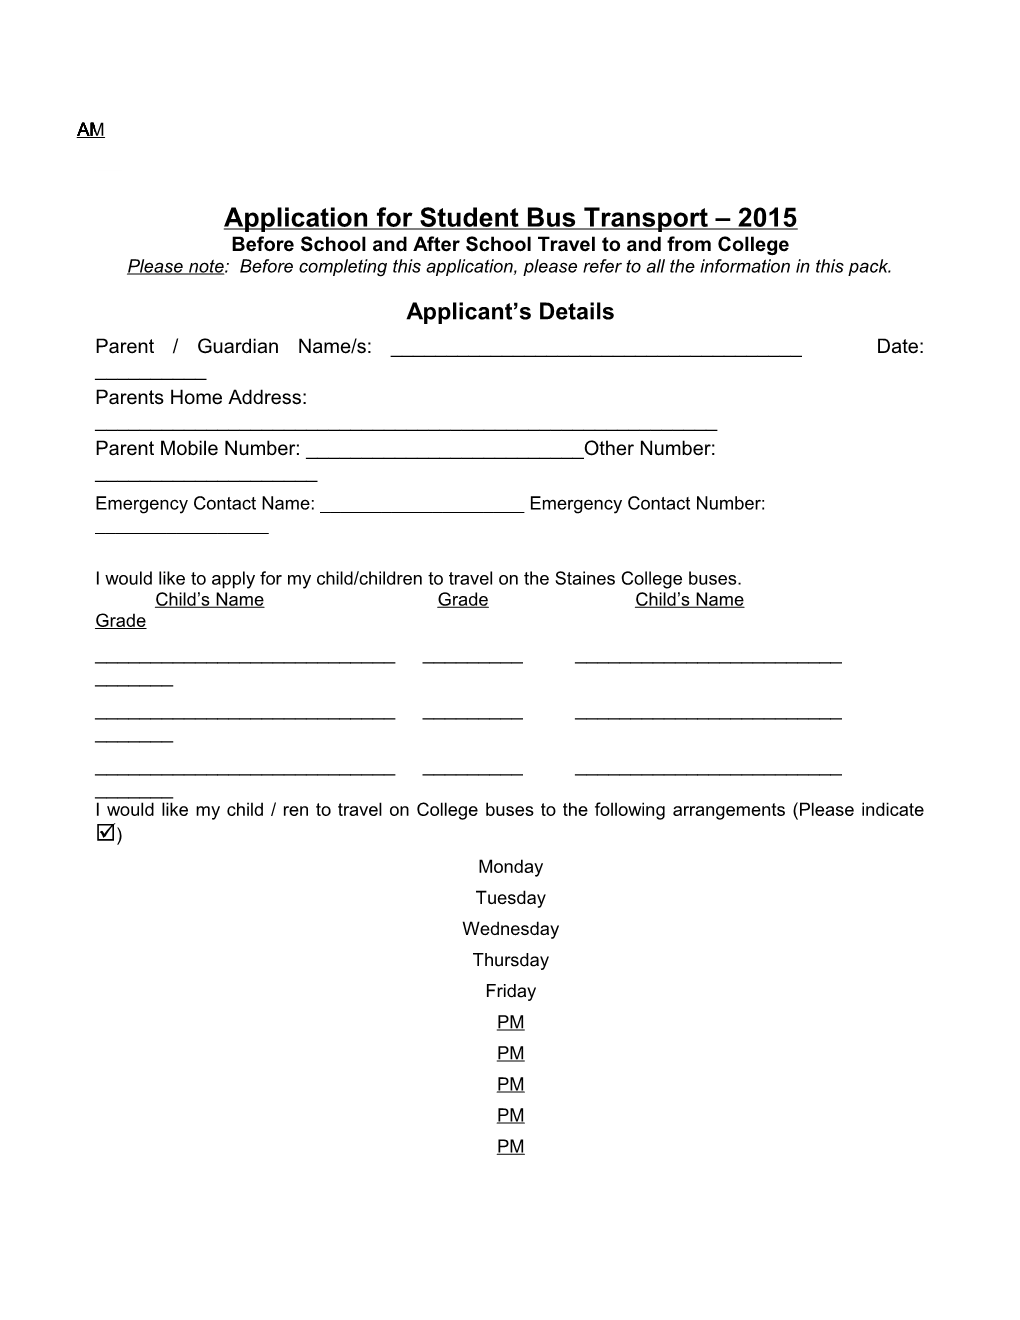 Application for Student Bus Transport 2015